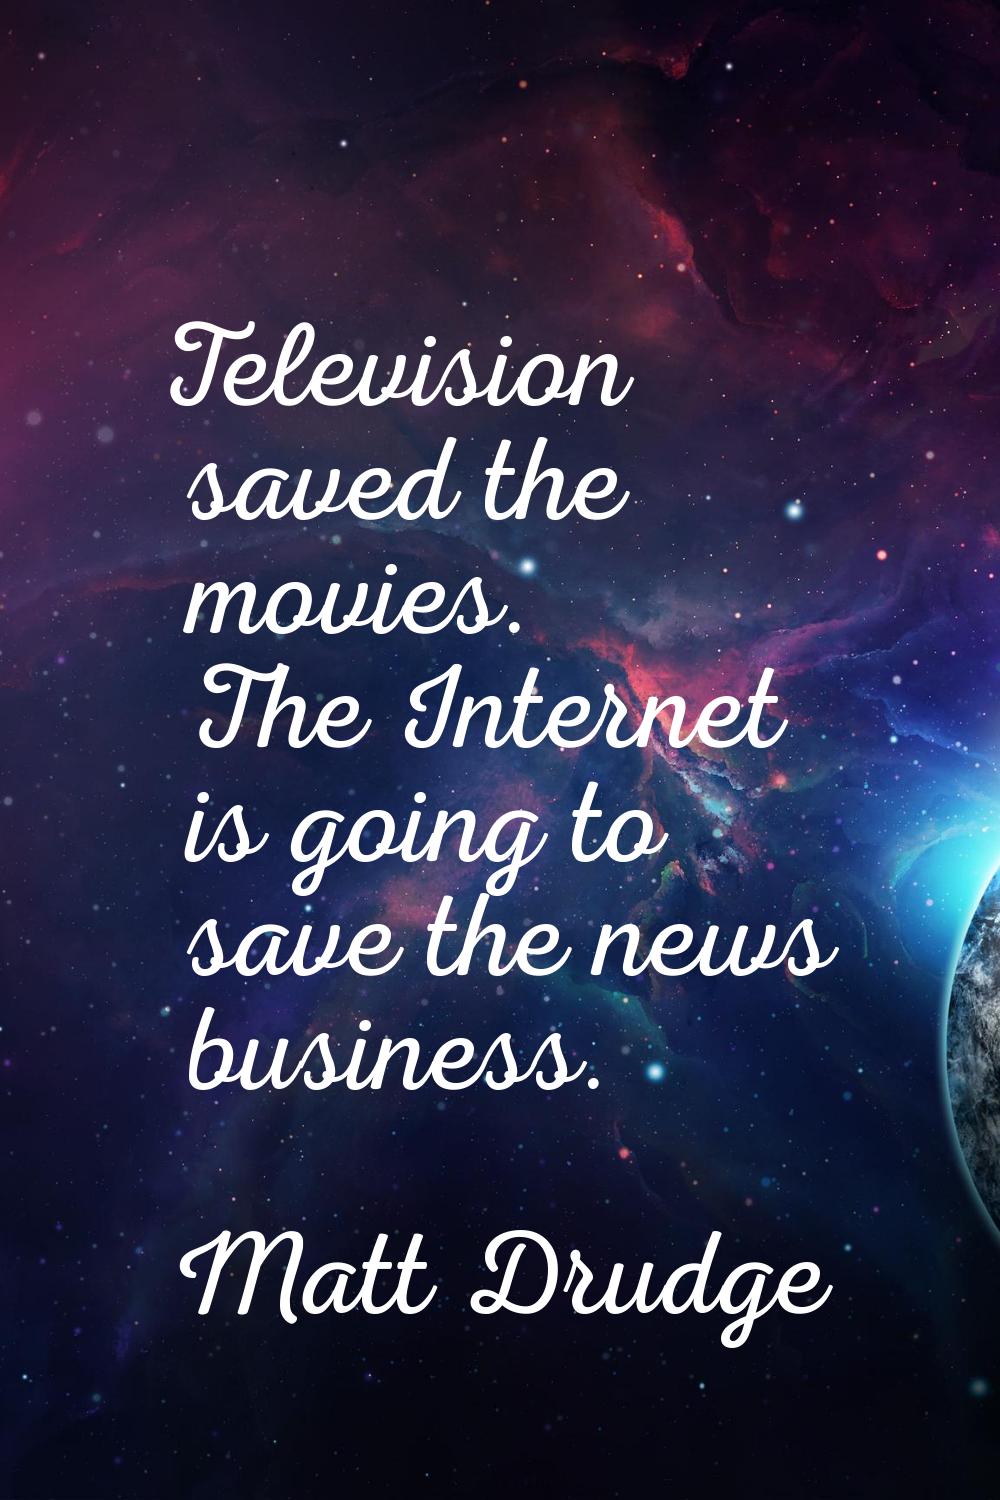 Television saved the movies. The Internet is going to save the news business.